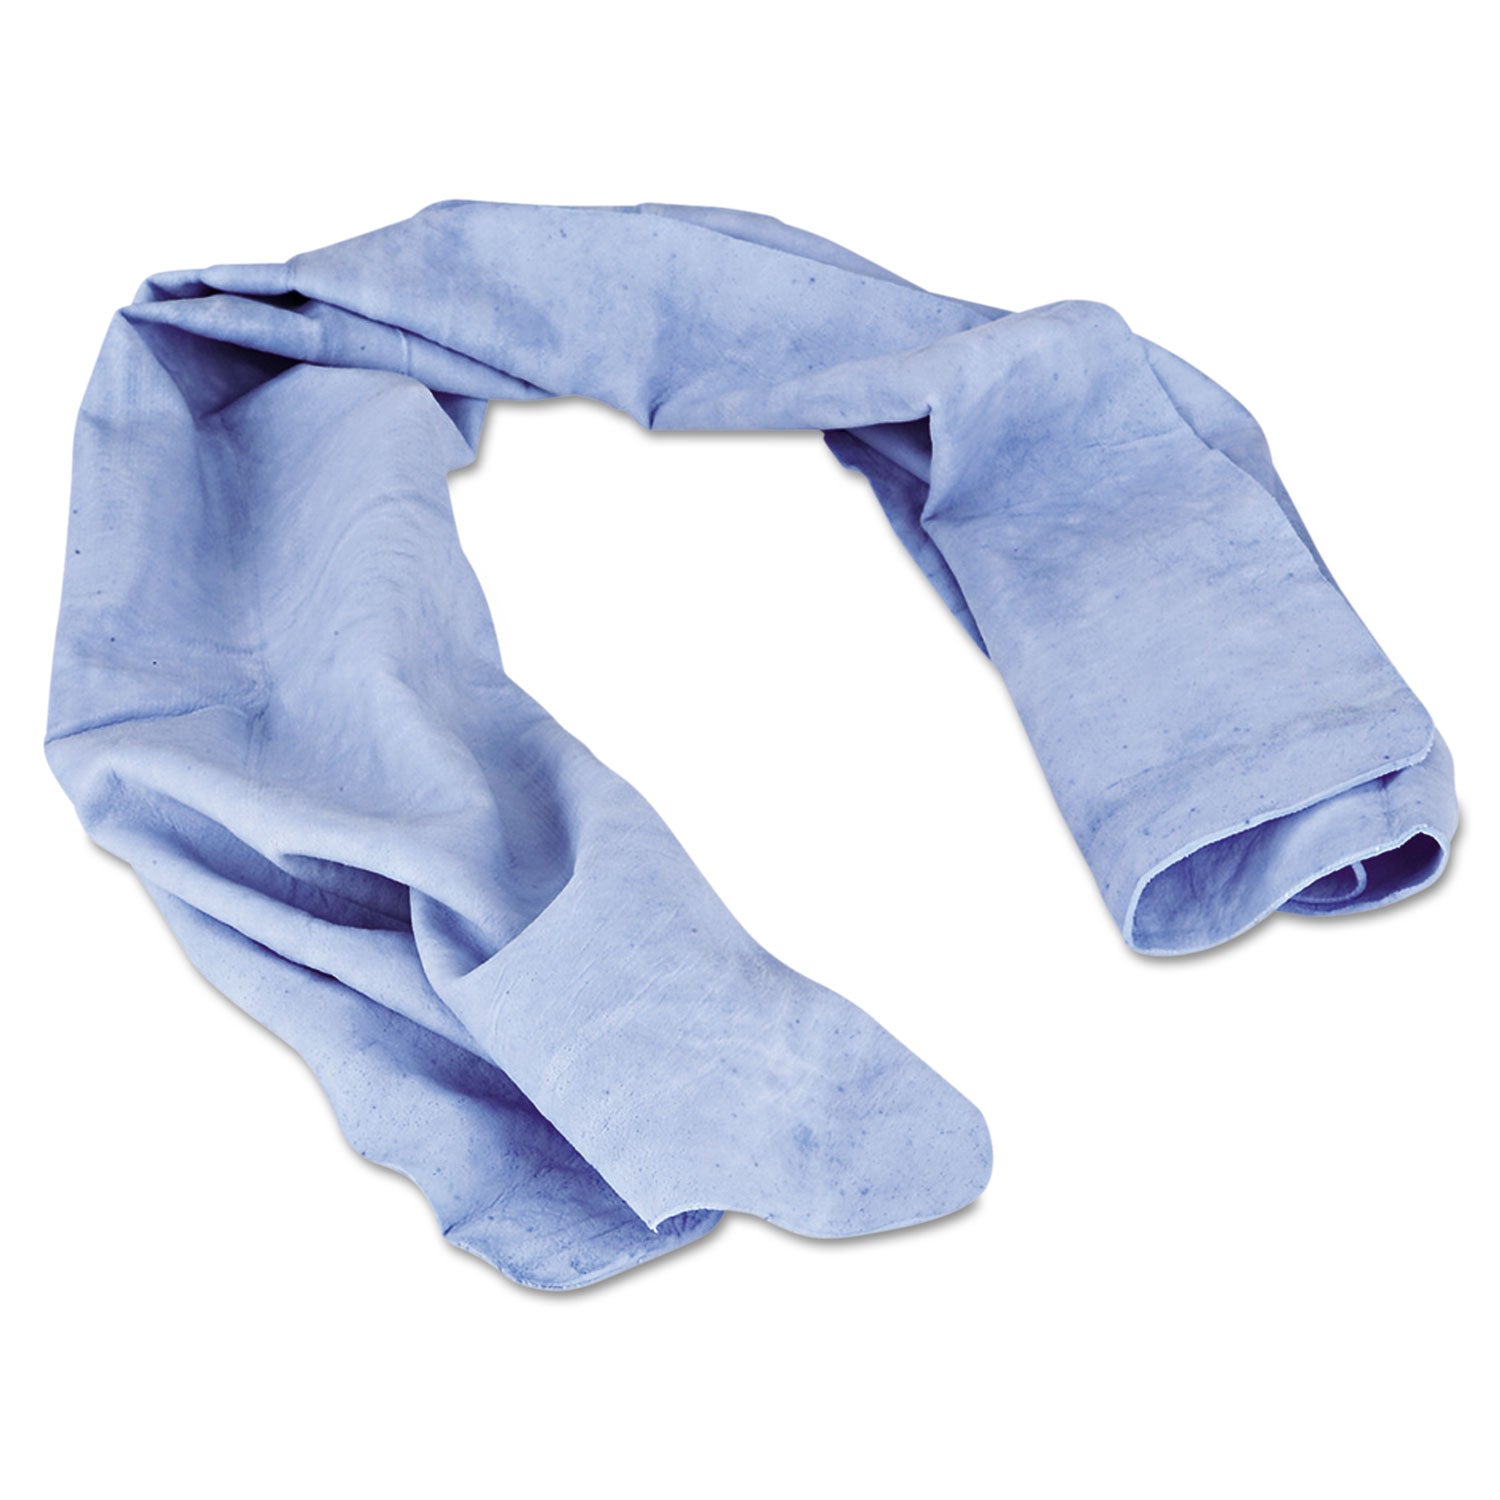 chill-its-cooling-towel-one-size-fits-most-blue_ego12420 - 1